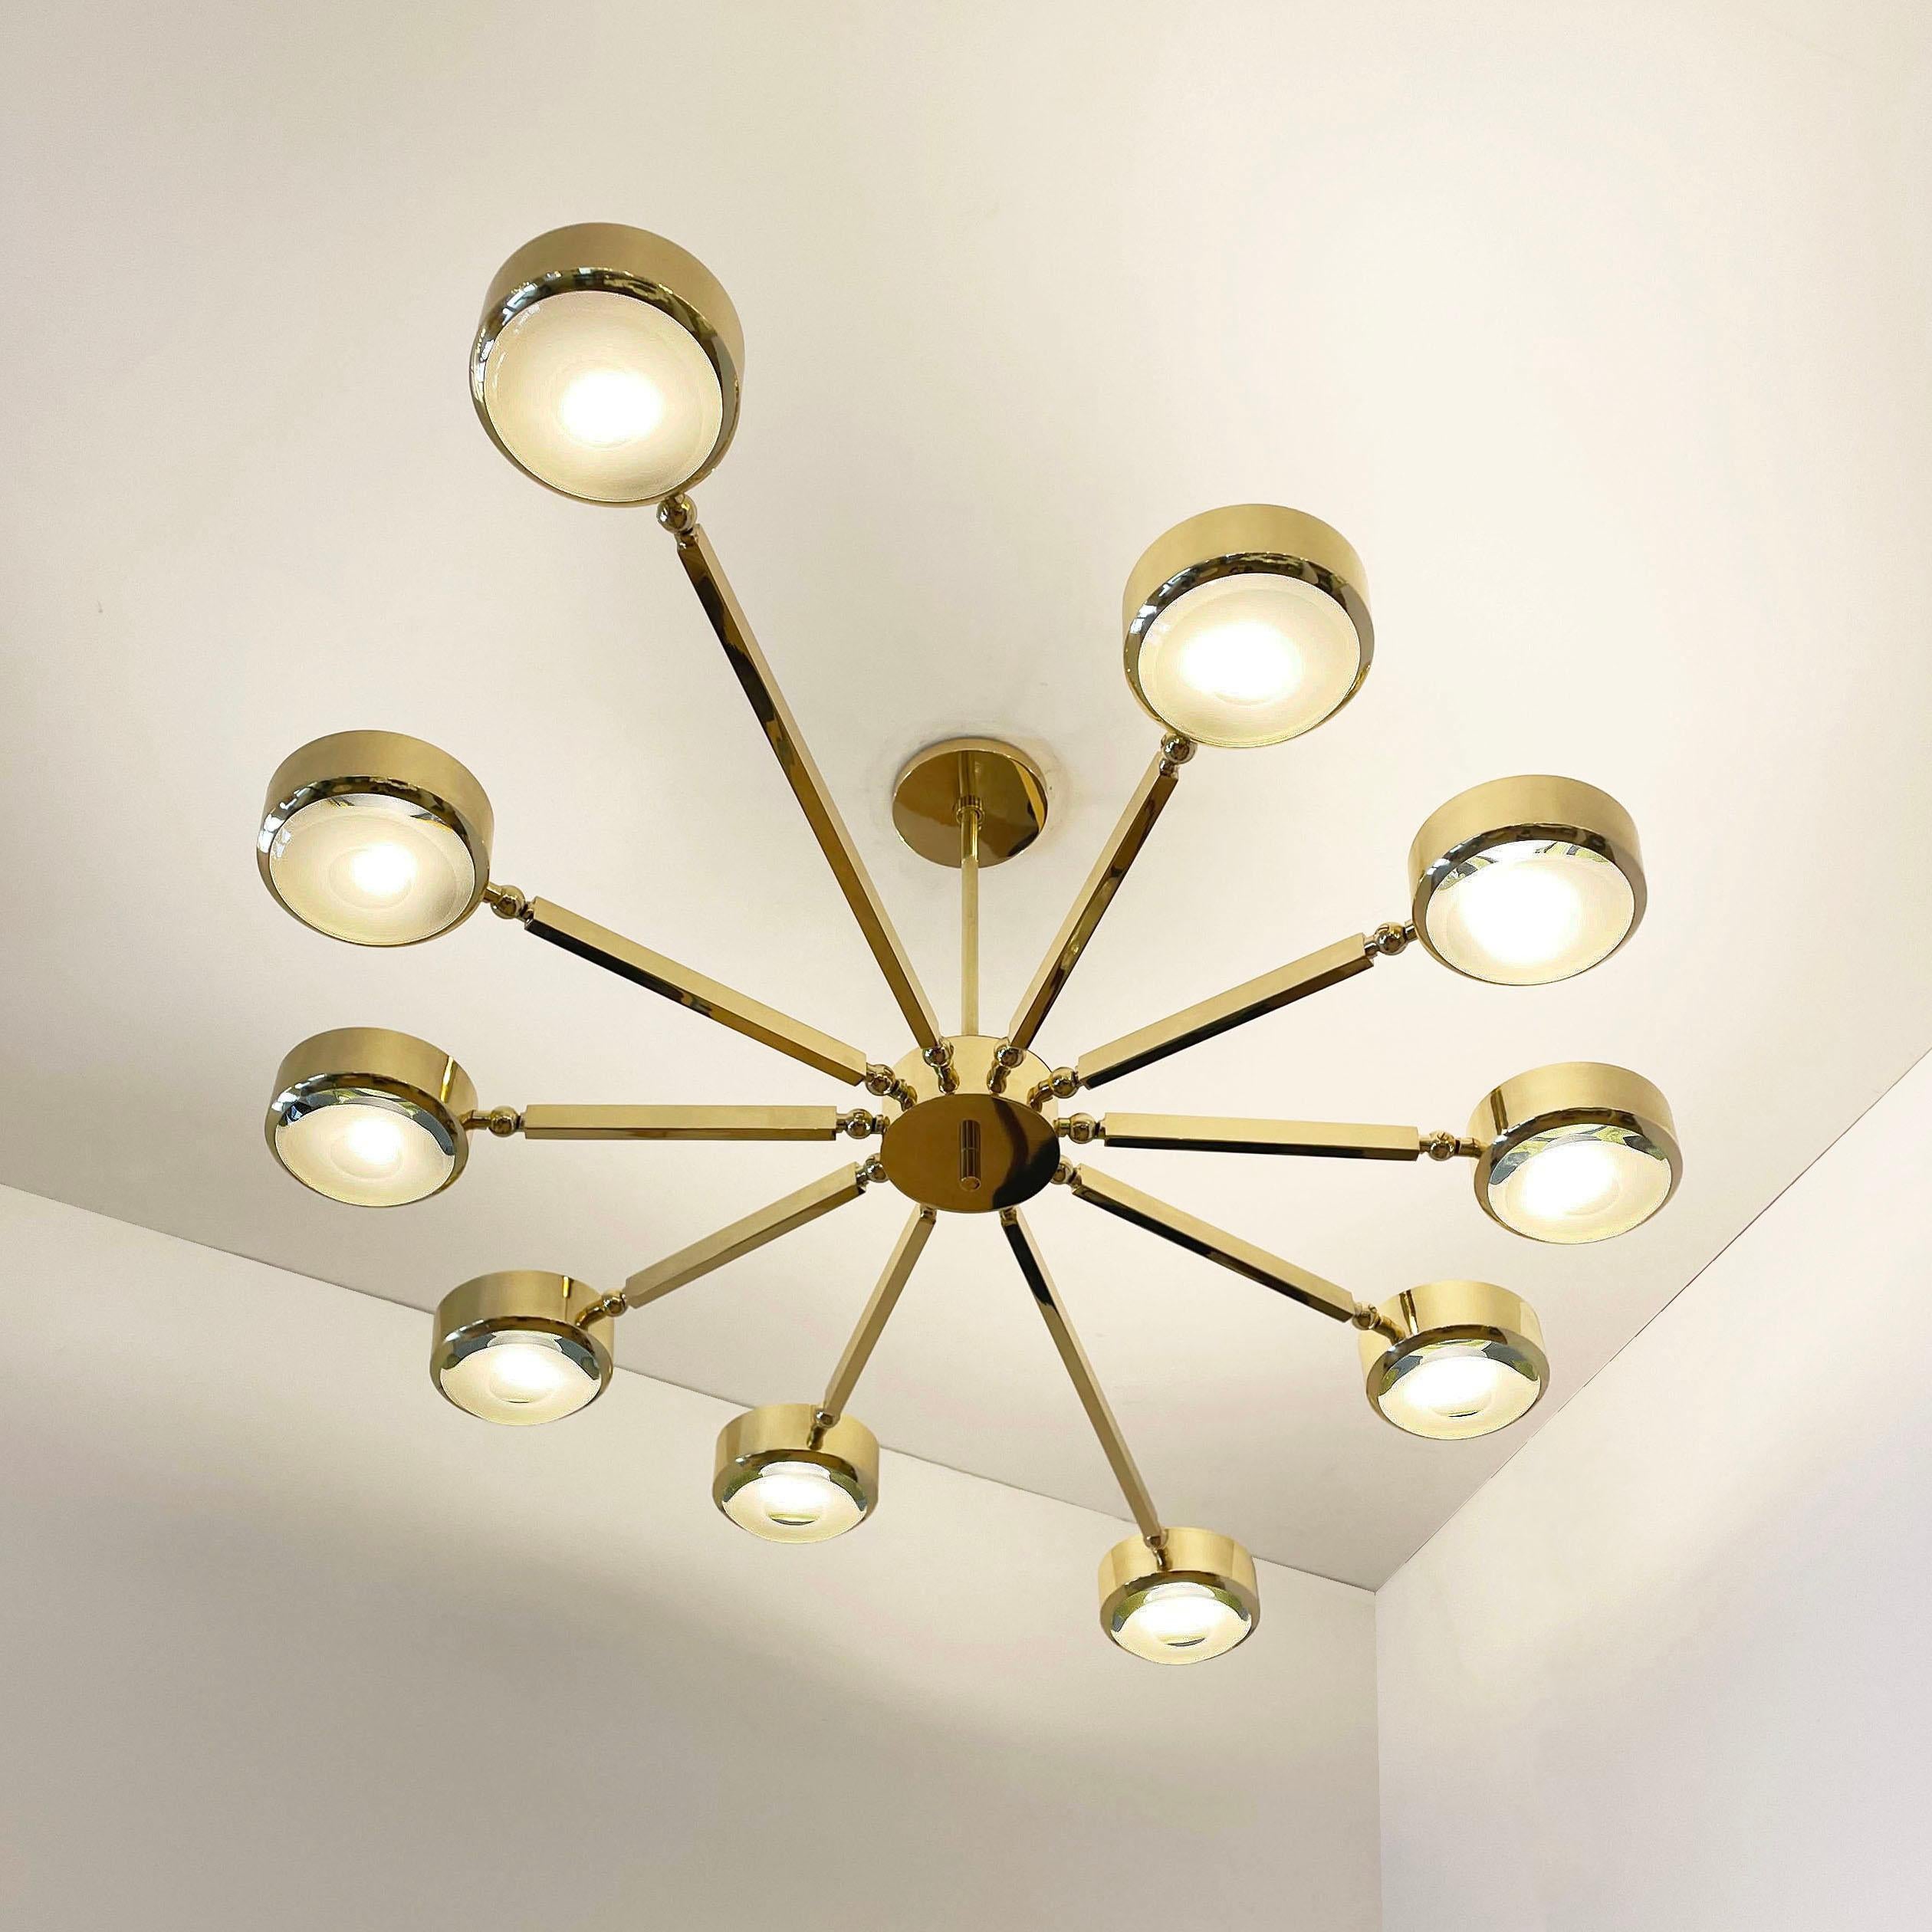 Italian Oculus Oval Ceiling Light by Gaspare Asaro- Polished Brass with Carved Glass For Sale